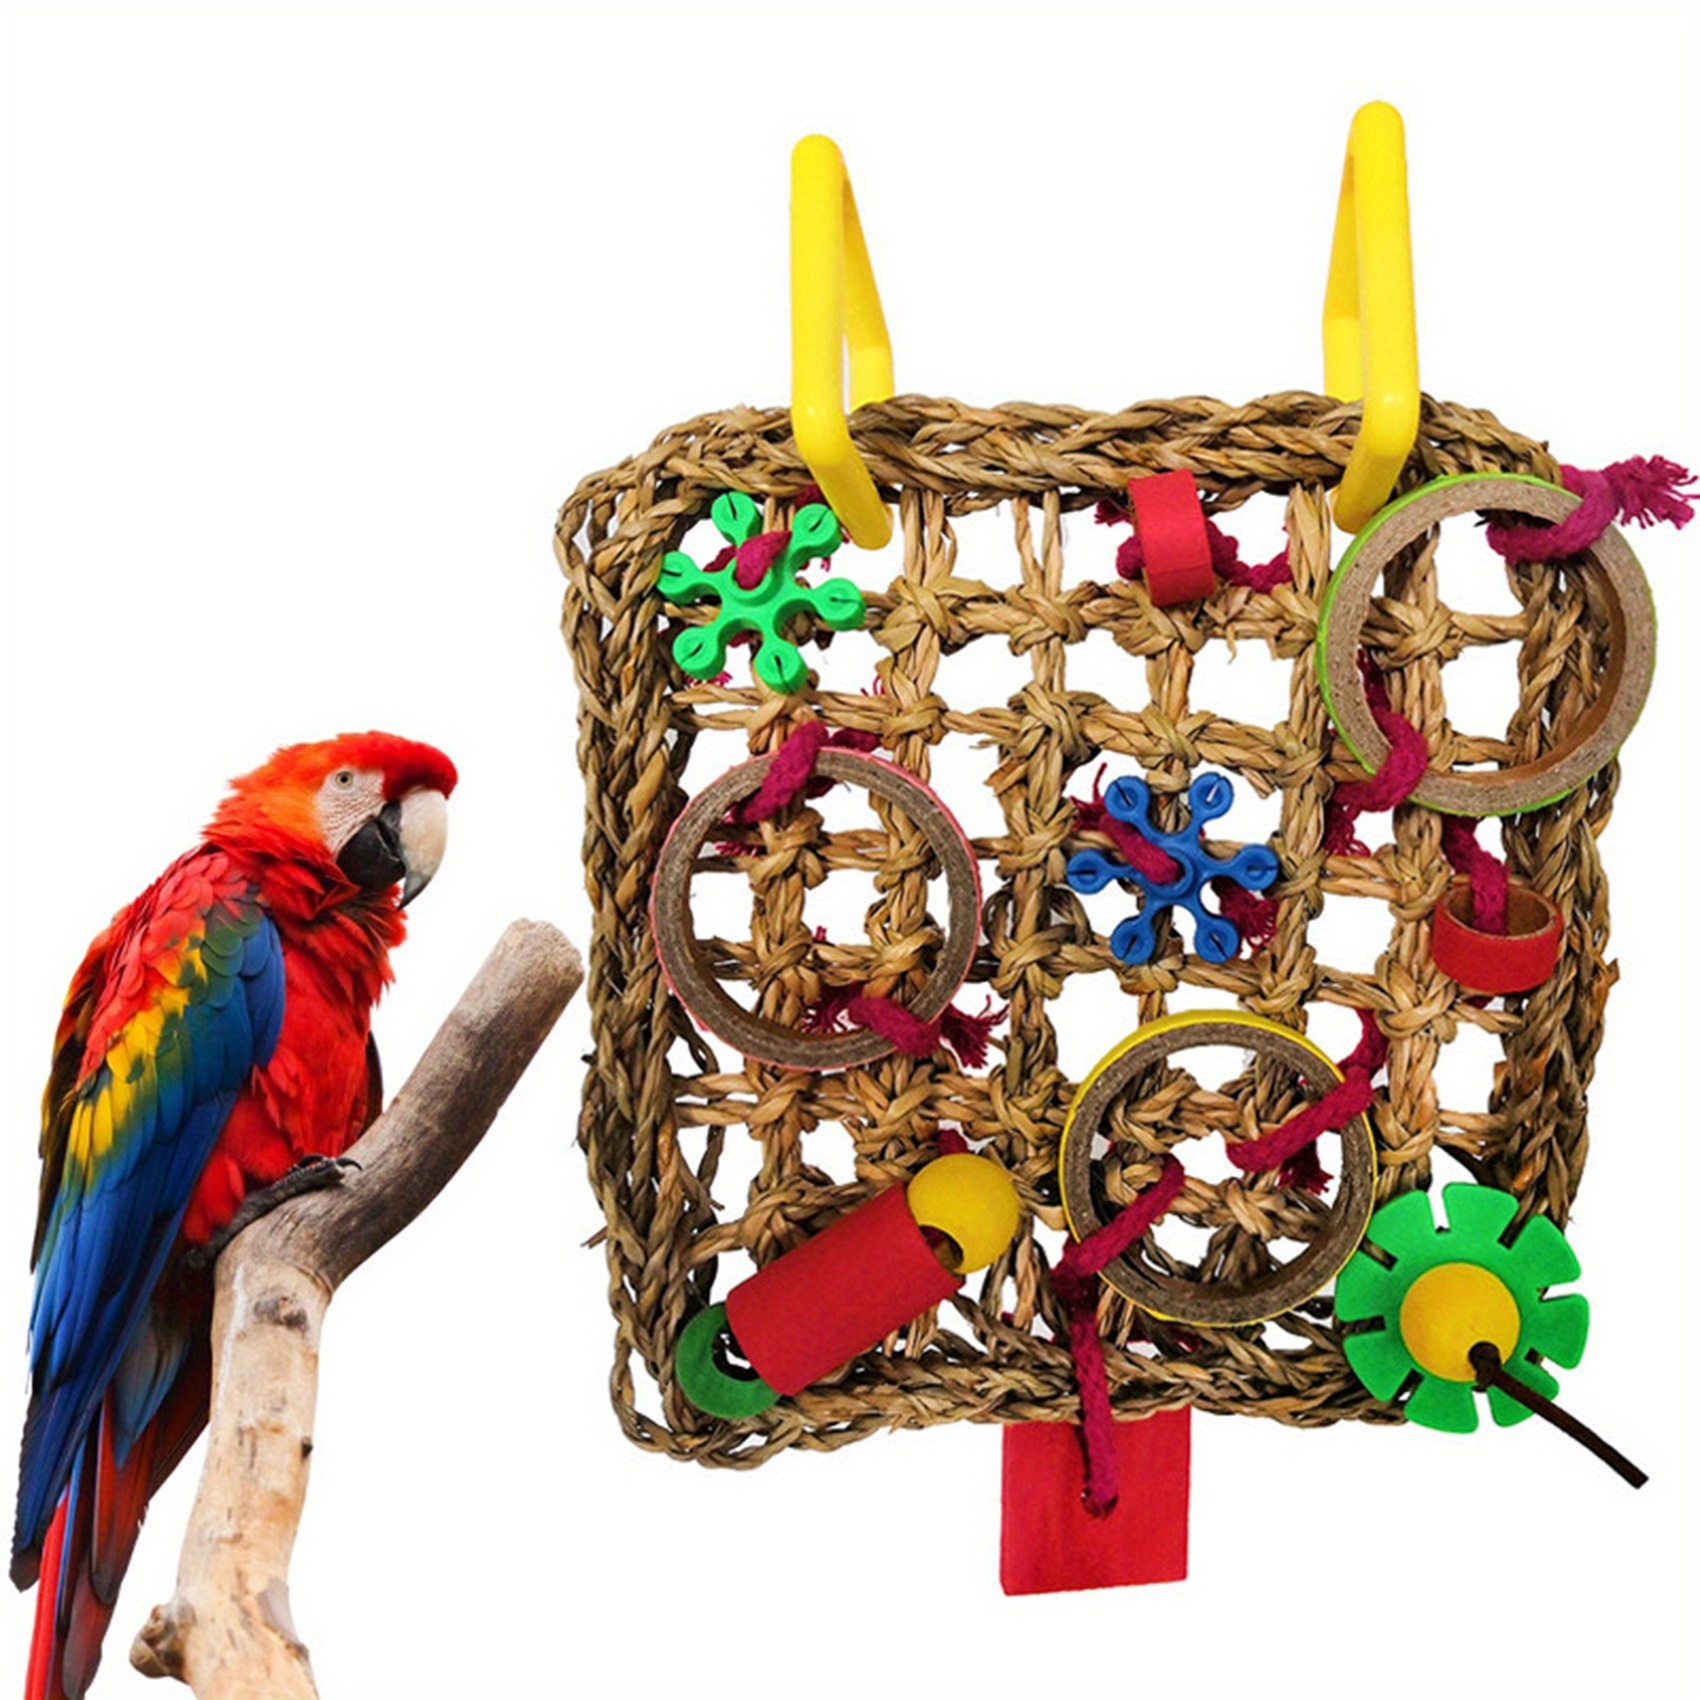 

engaging" Colorful Parrot Play Net - Durable Climbing & Chewing Toy For Birds, Random Design